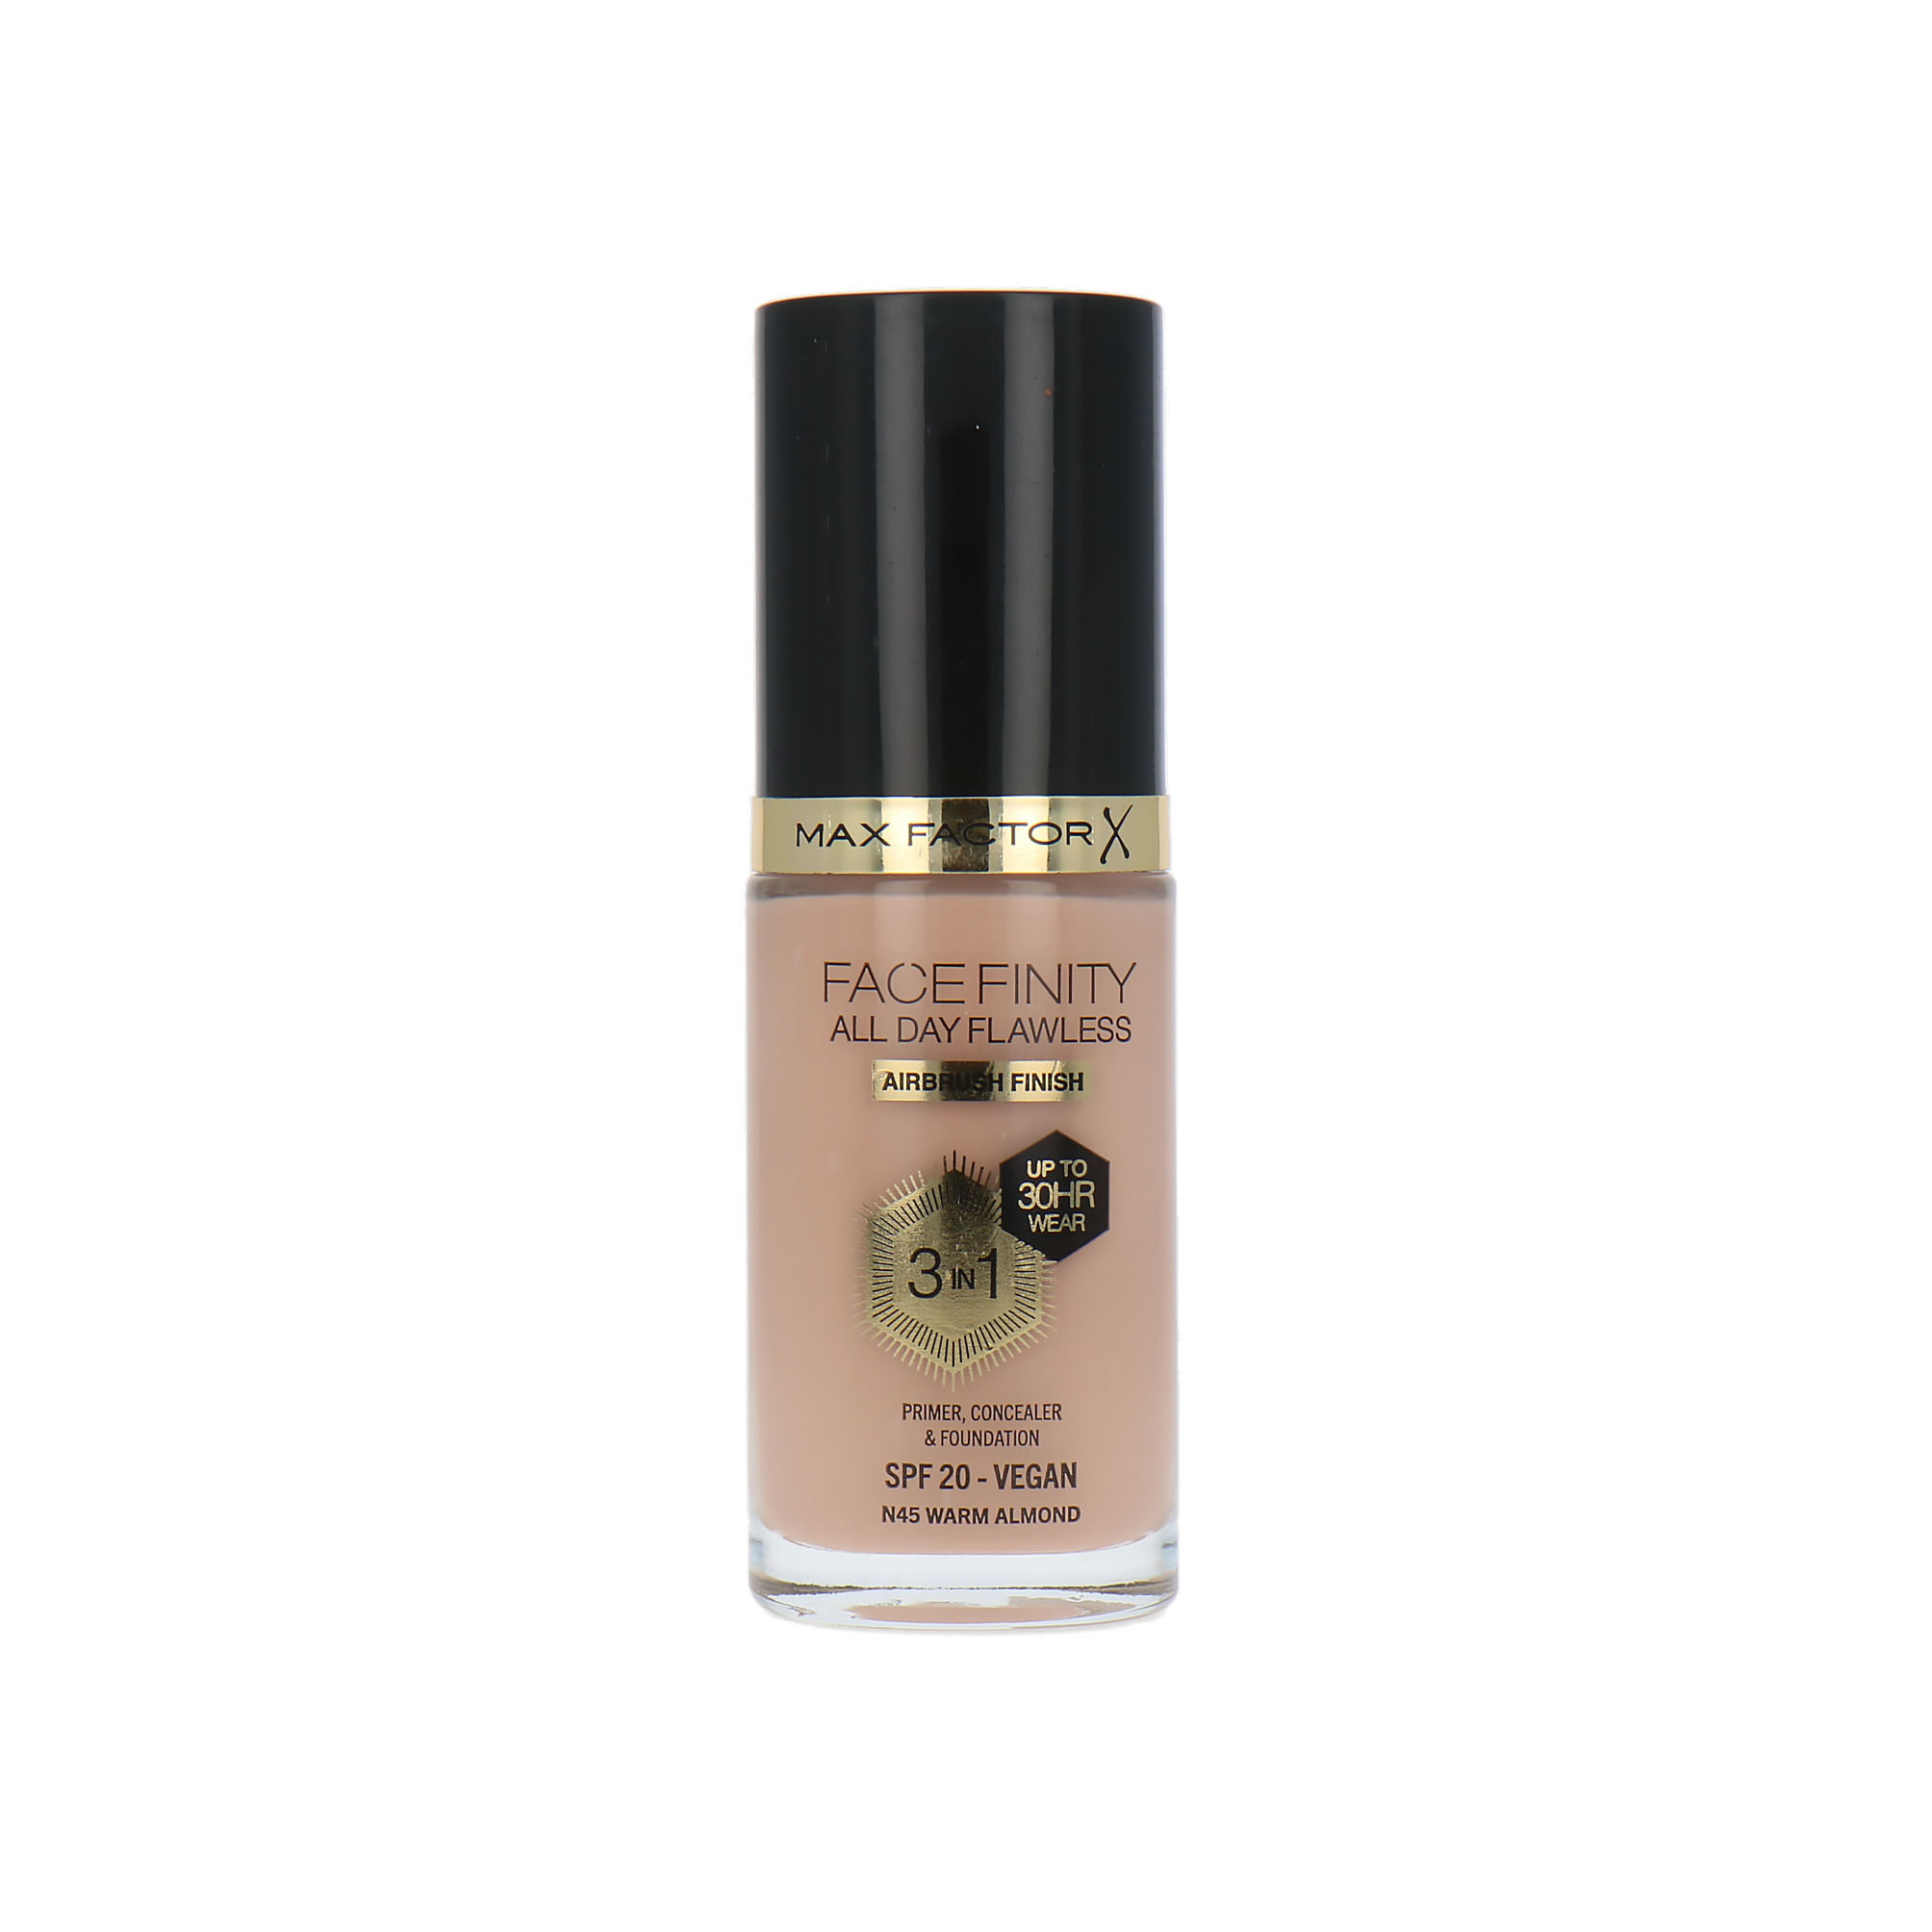 Max Factor Facefinity All Day Flawless 3 in 1 30H Airbrush Finish Fond de teint - N45 Warm Almond